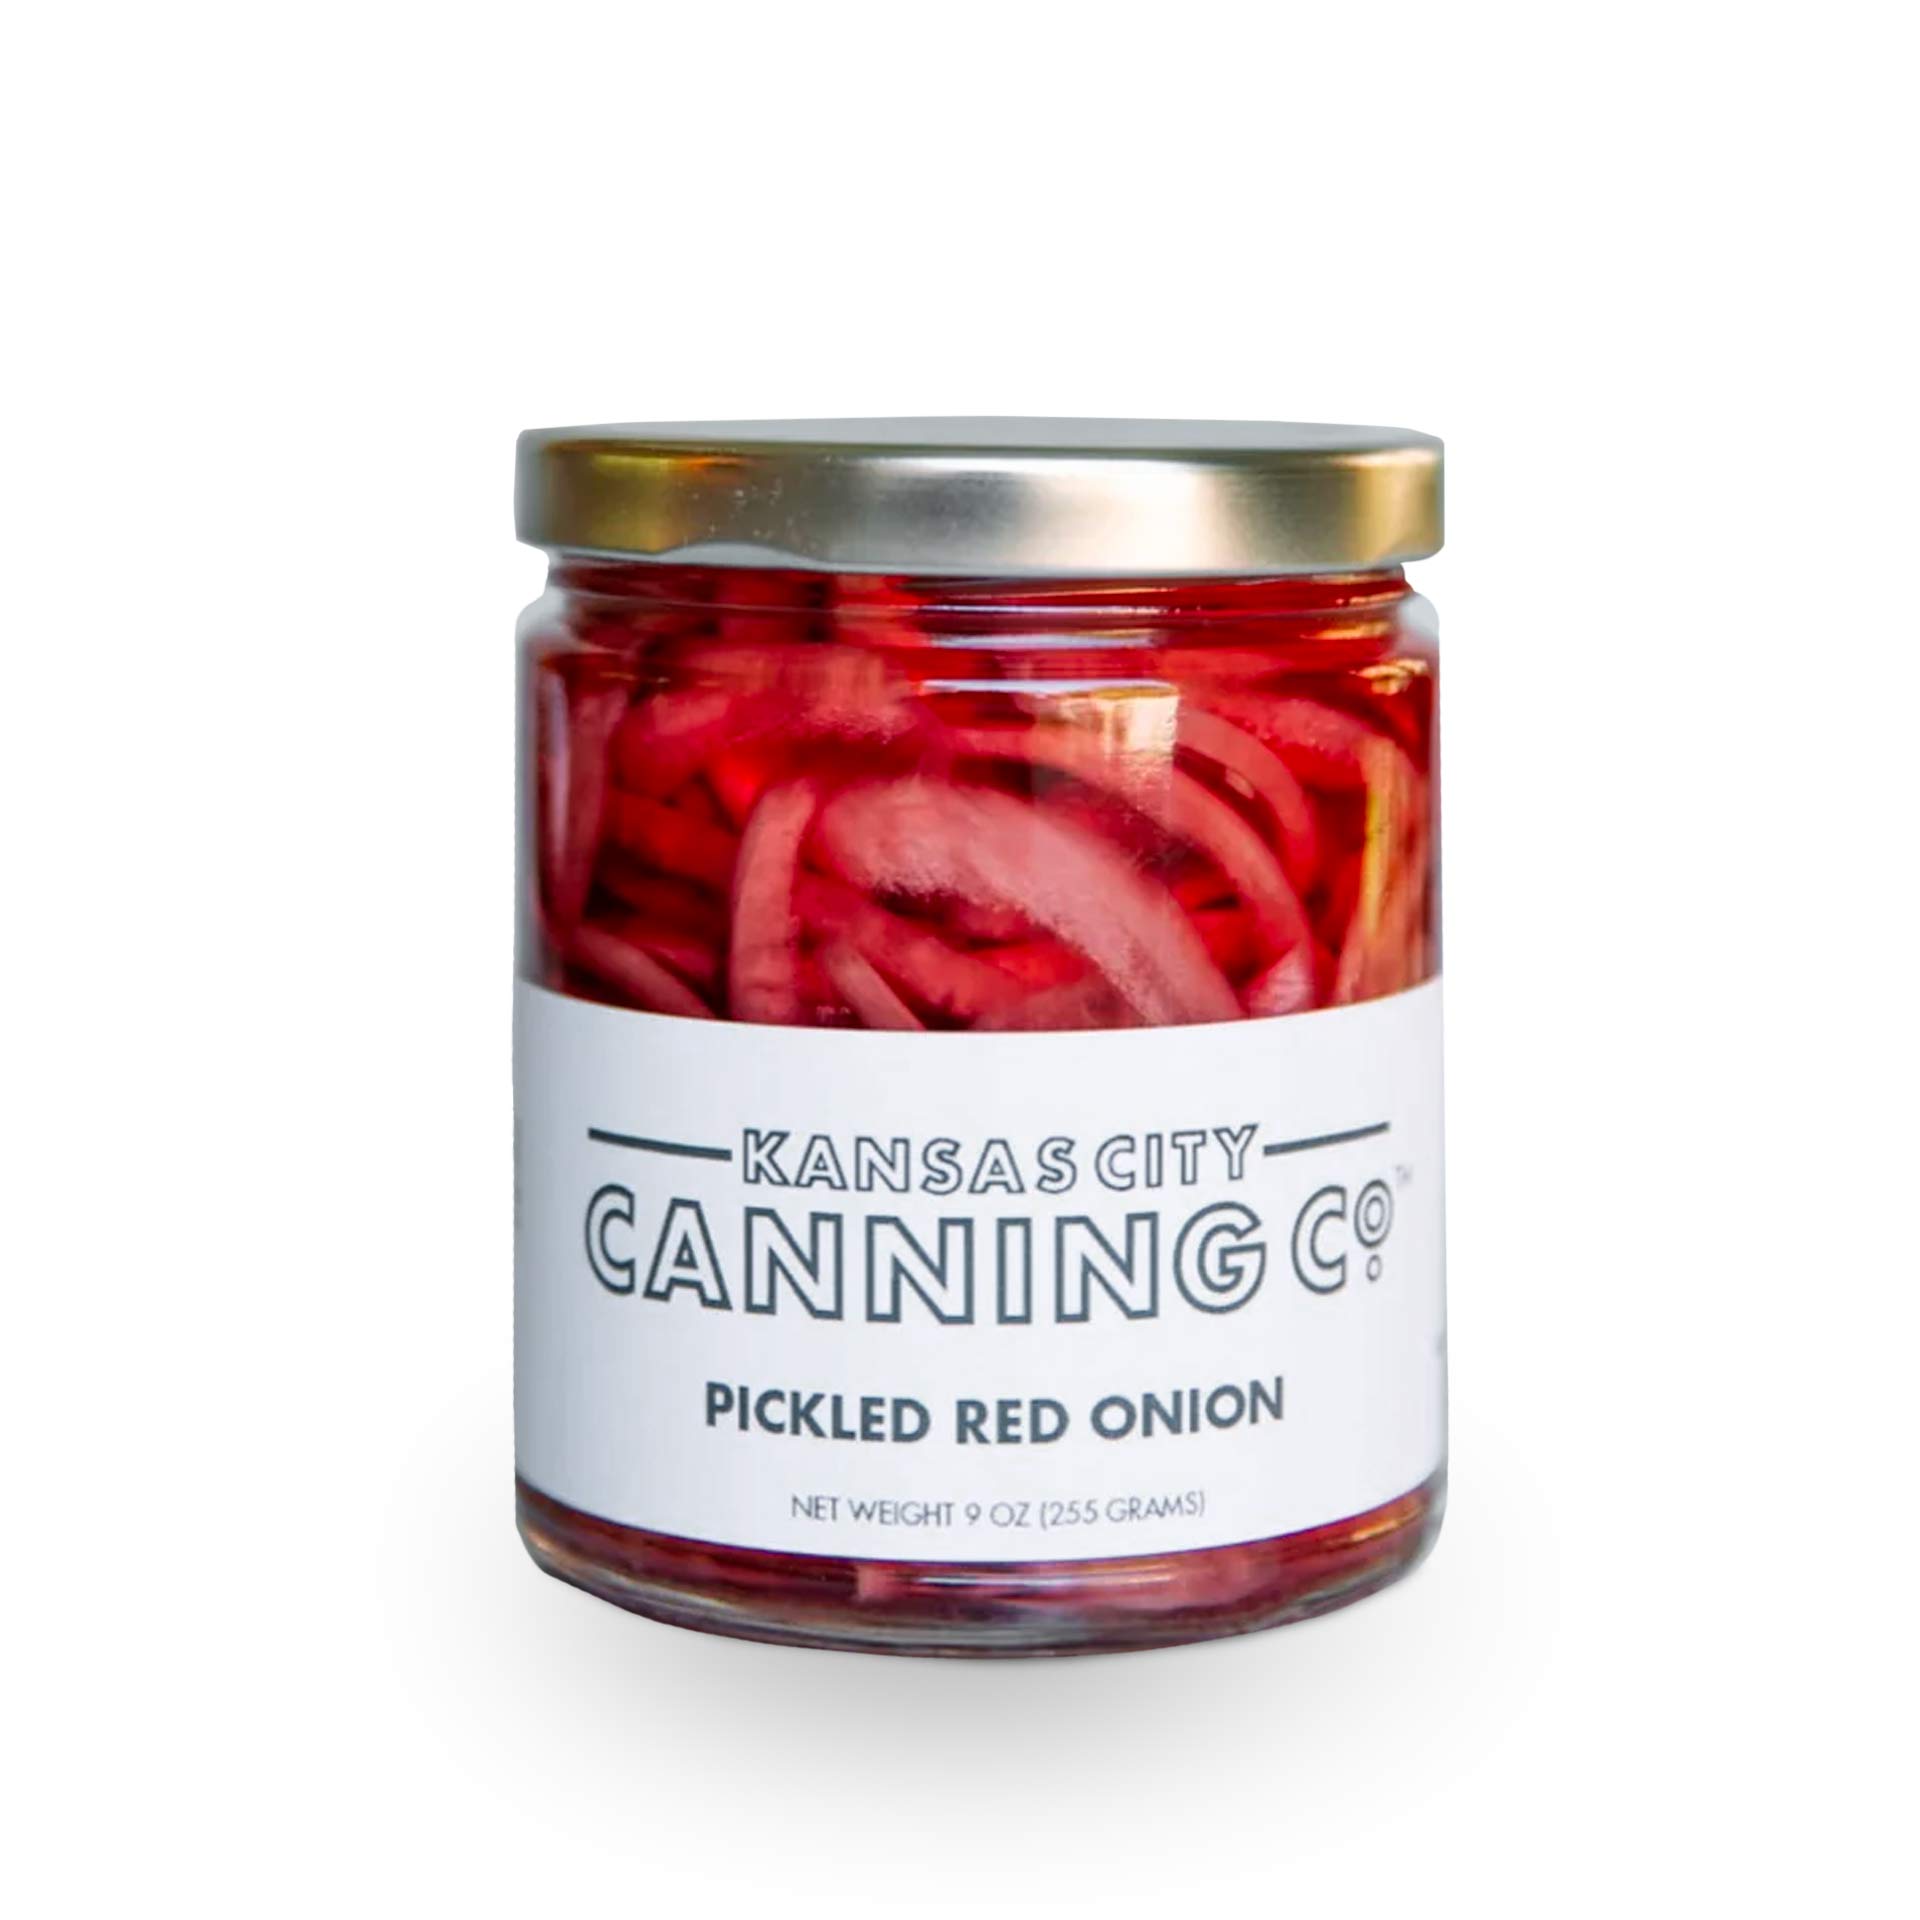 Kansas City Canning Co Pickled Red Onion 12043294